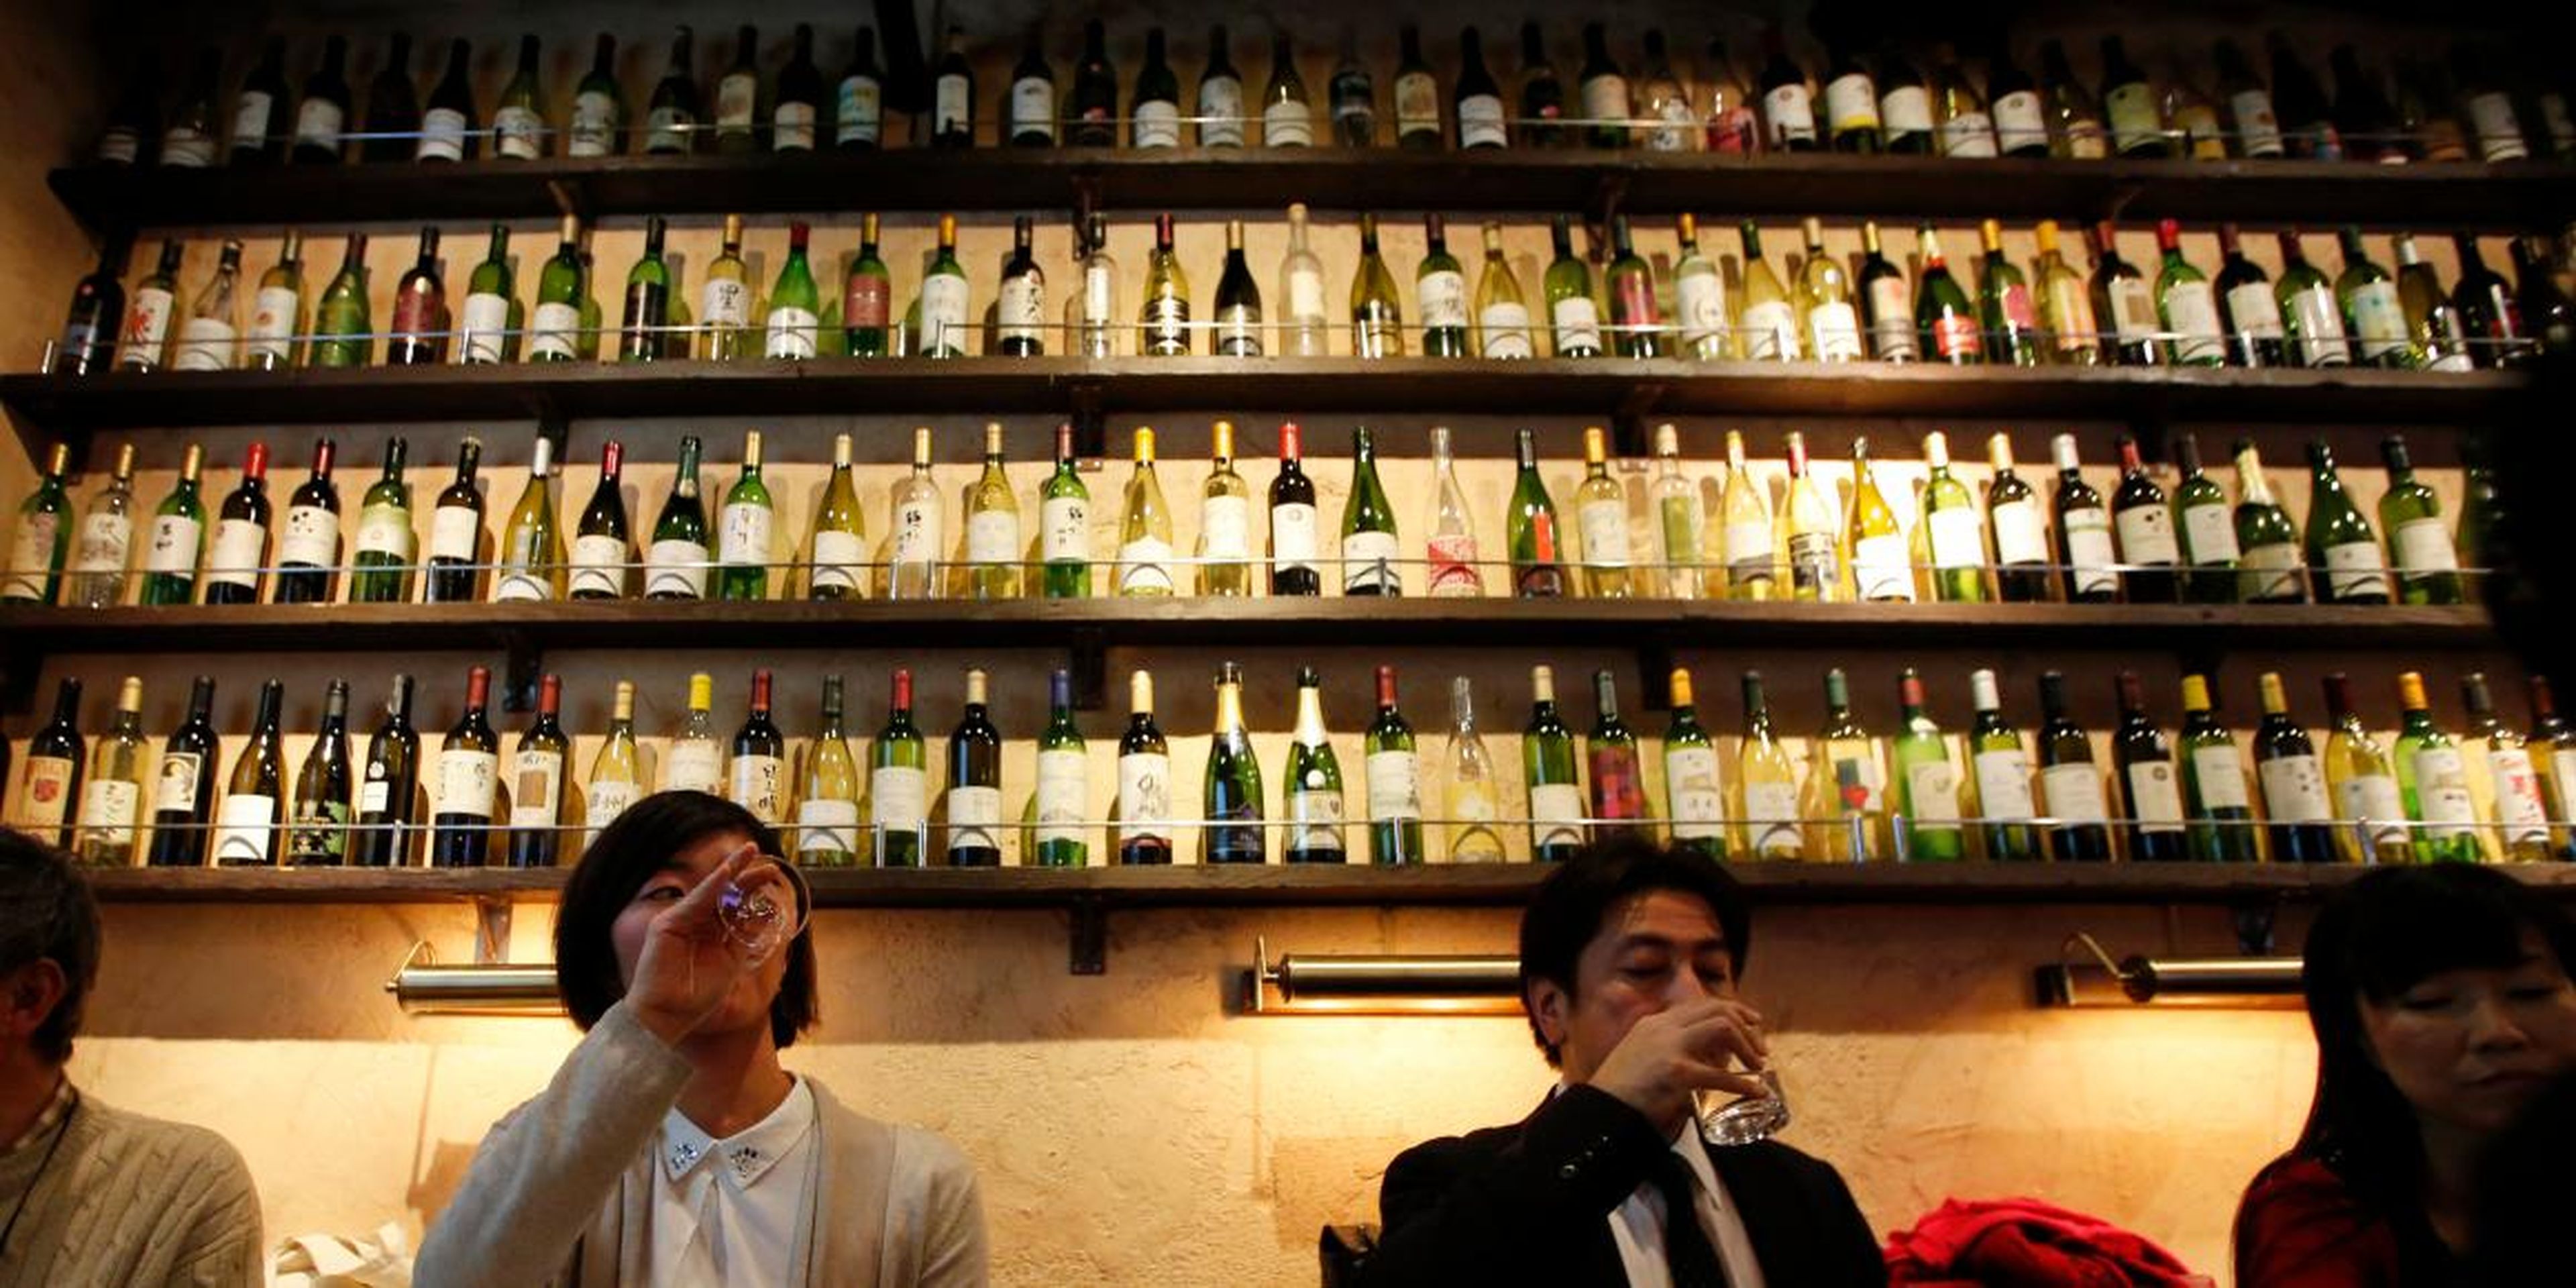 European wines are now cheaper in Japan.